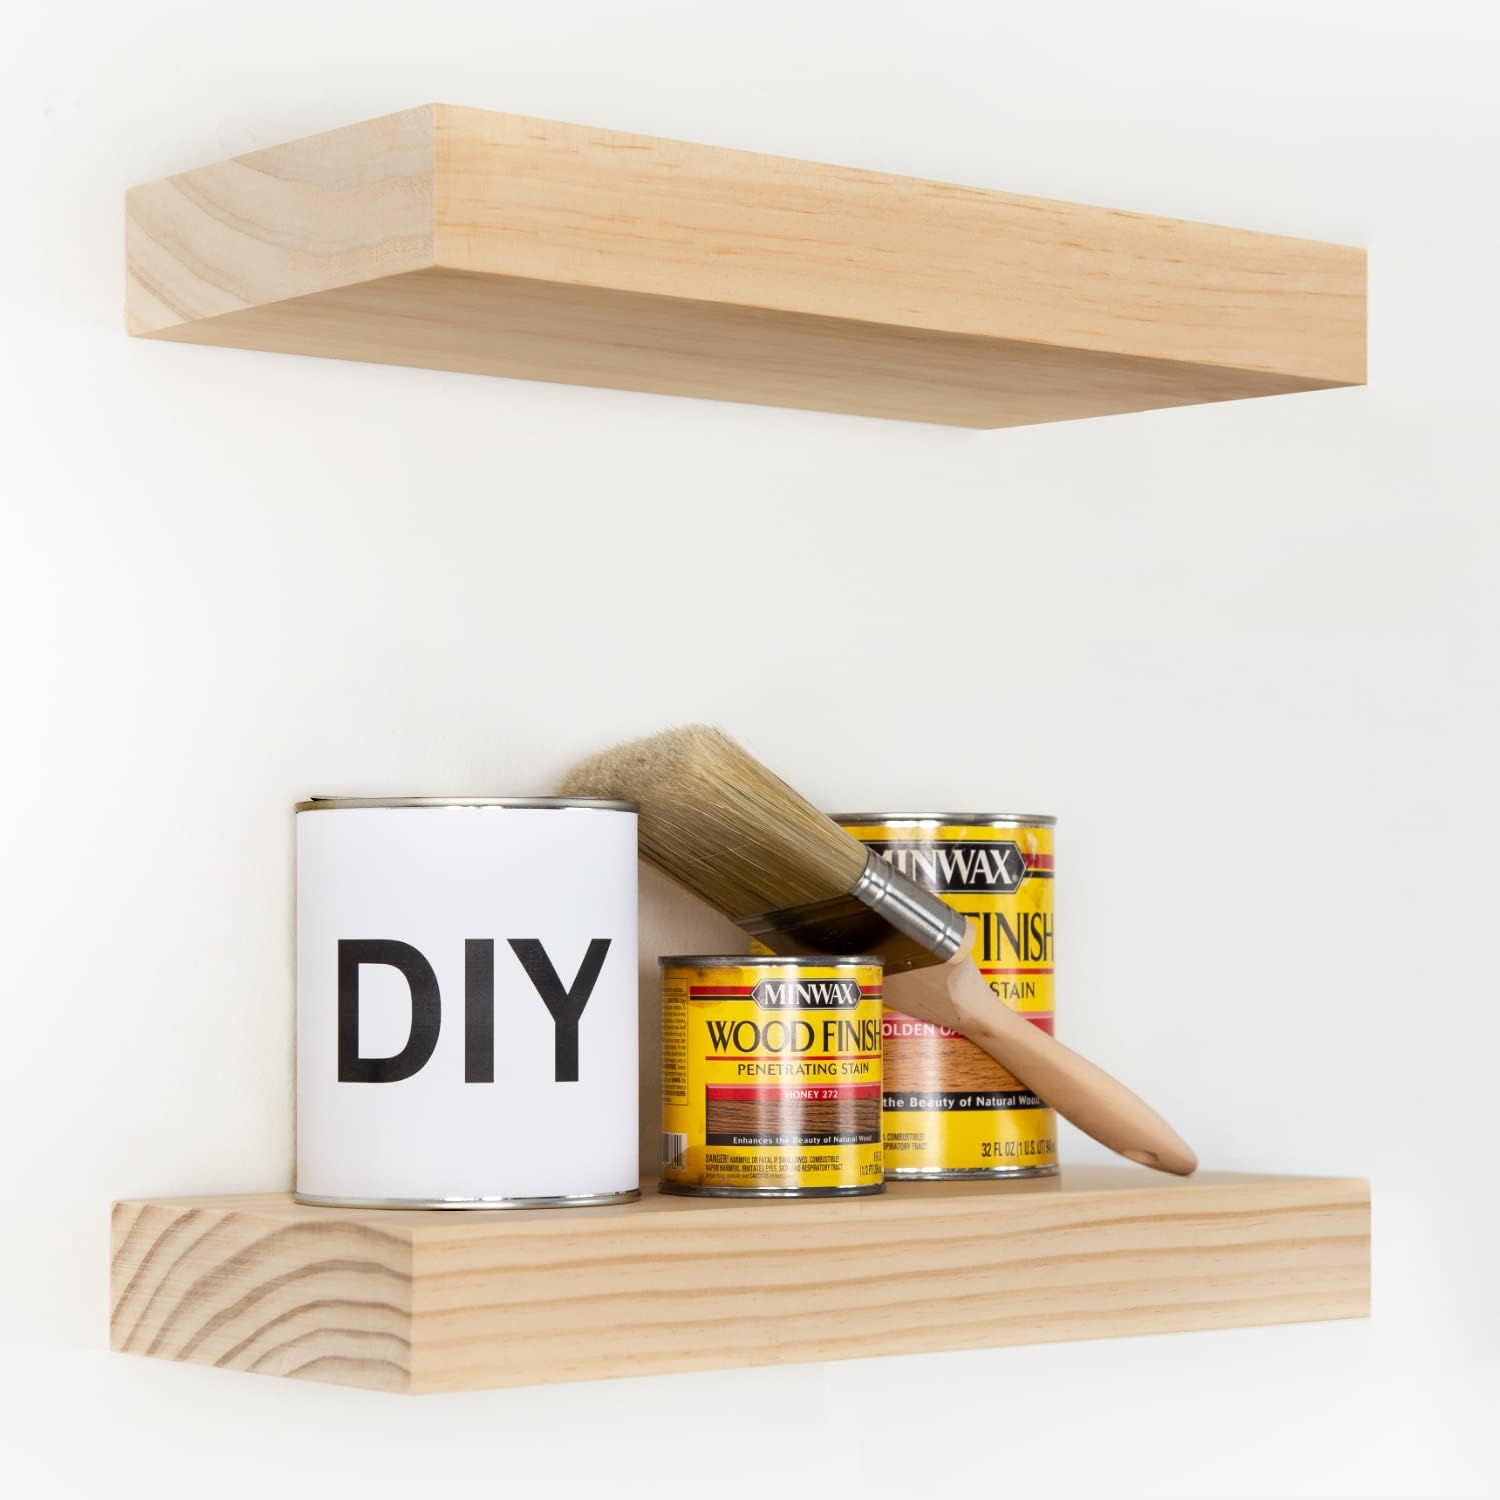 How to Install Rustic Floating Shelves: 15 Easy DIY Steps for a Modern Look